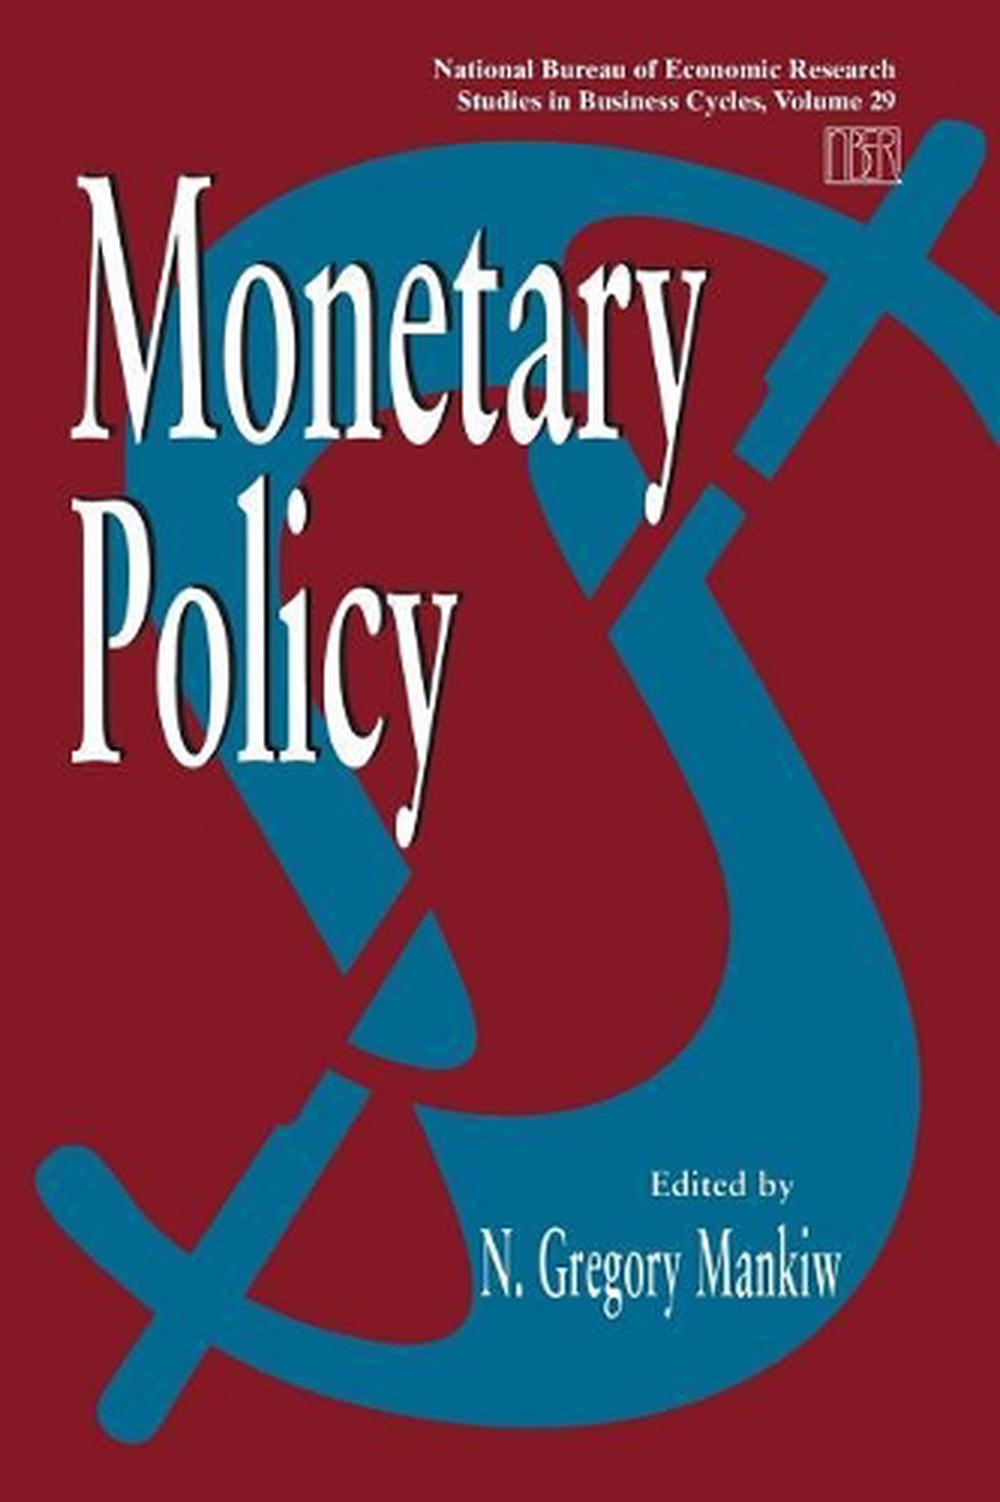 literature review on monetary policy